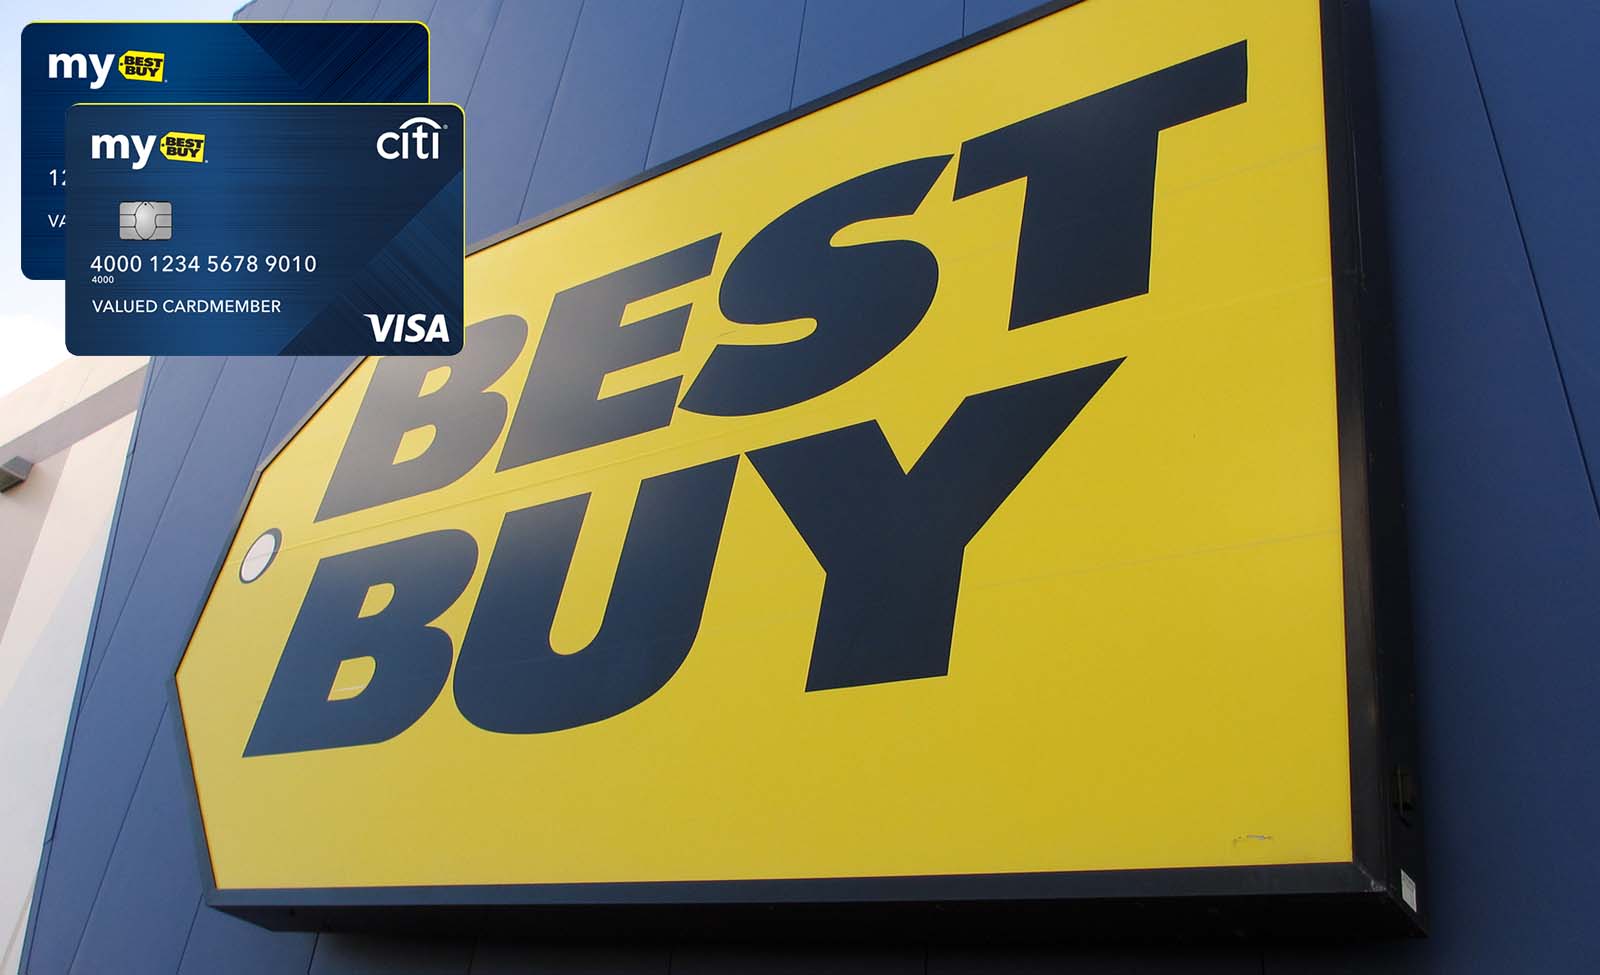 best buy credit card review 2020 should you get it